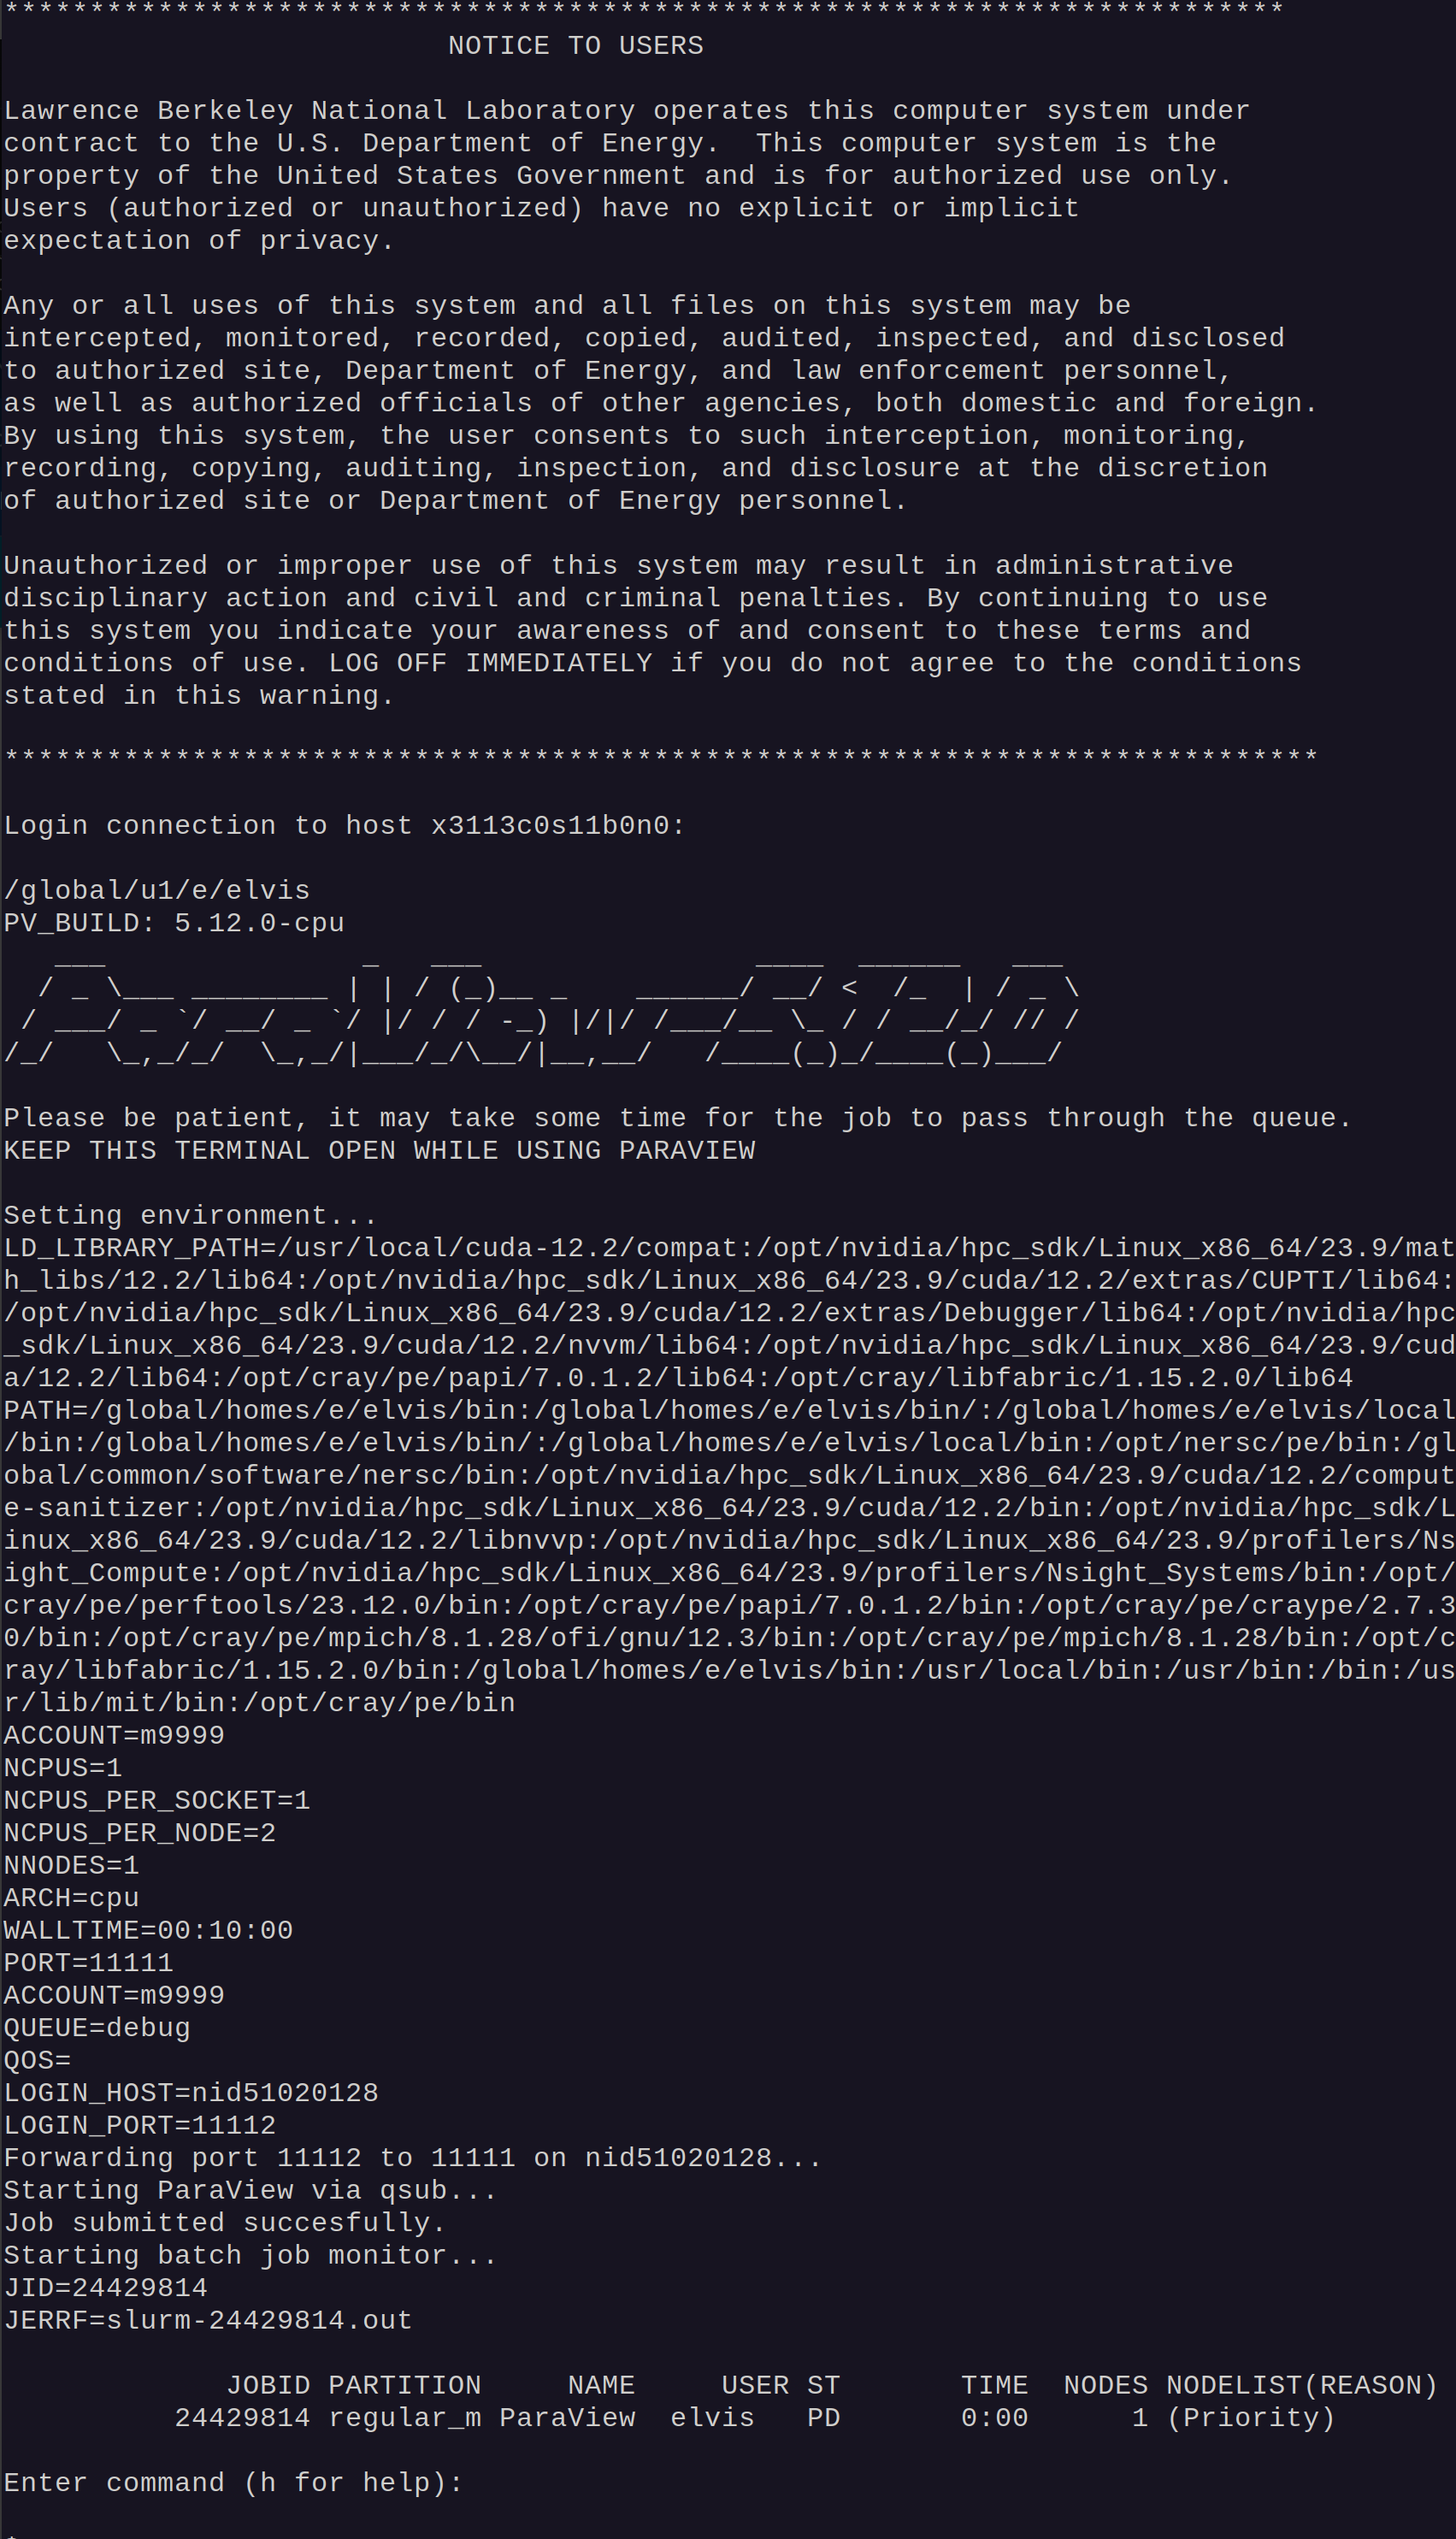 Terminal session with ParaView ascii art, last line is "Press: u to print job status or q to quit."